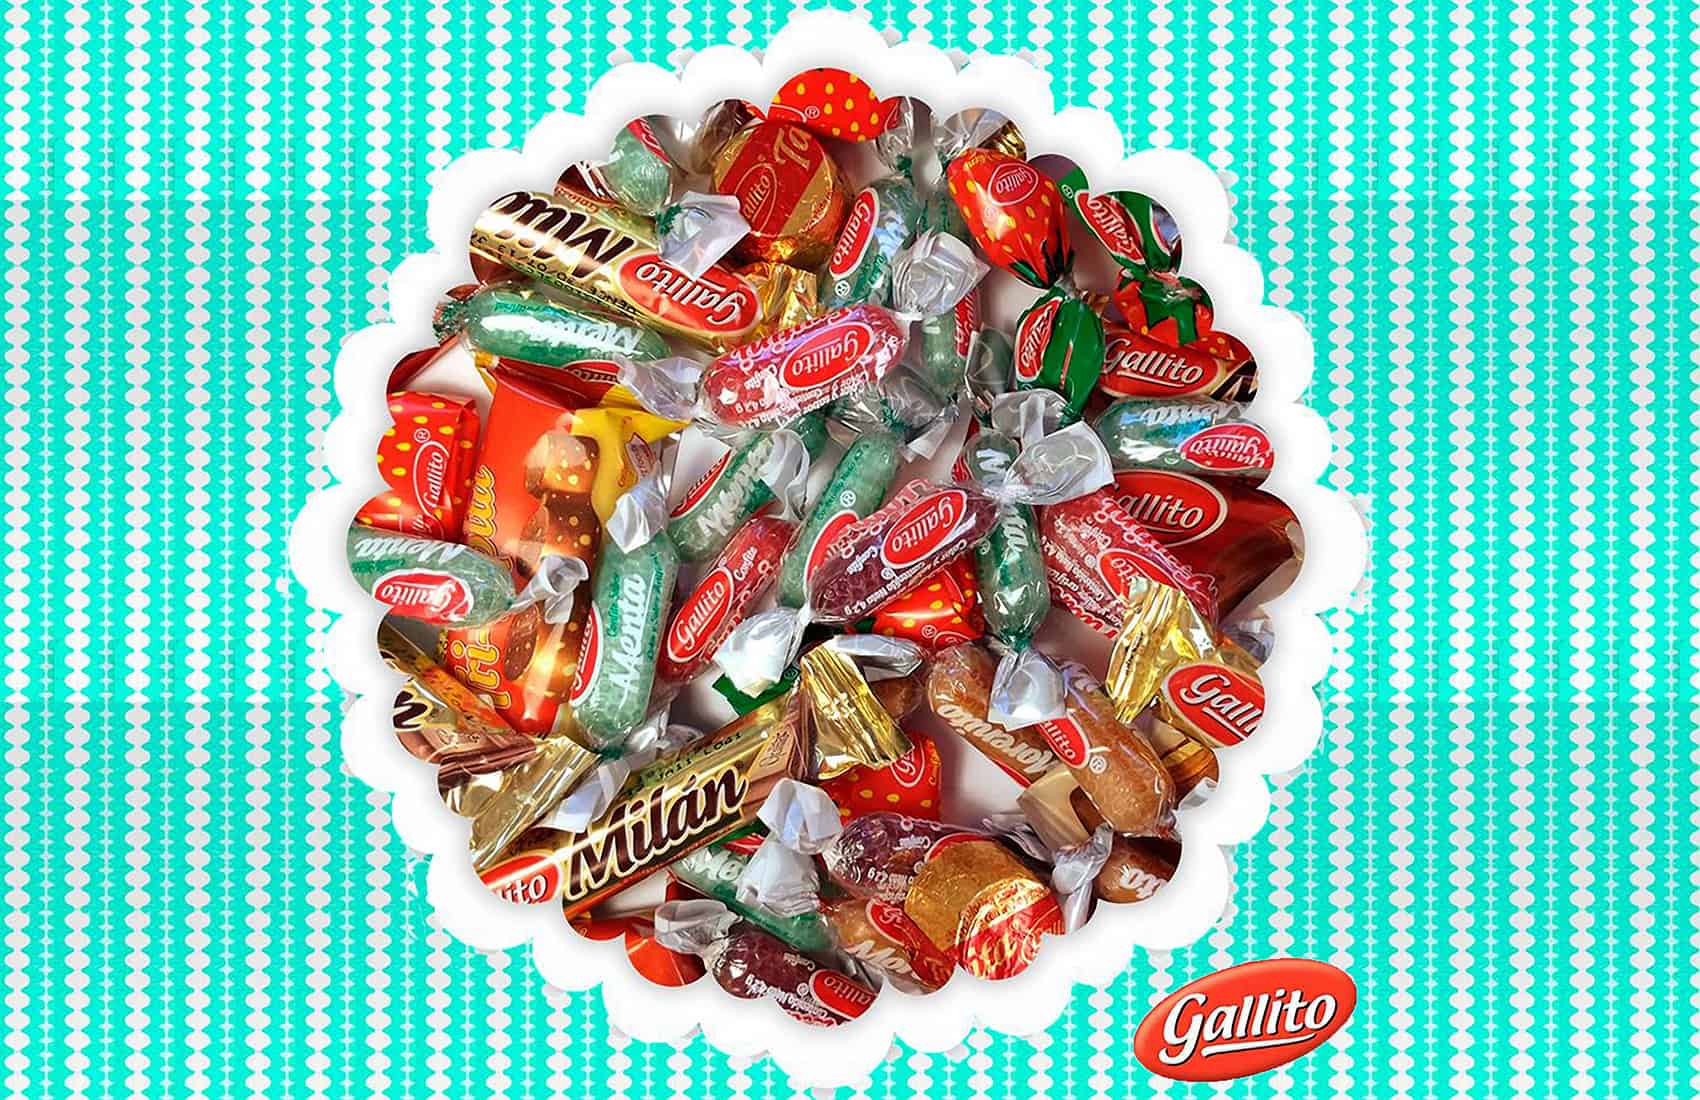 Gallito sweets and chocolates